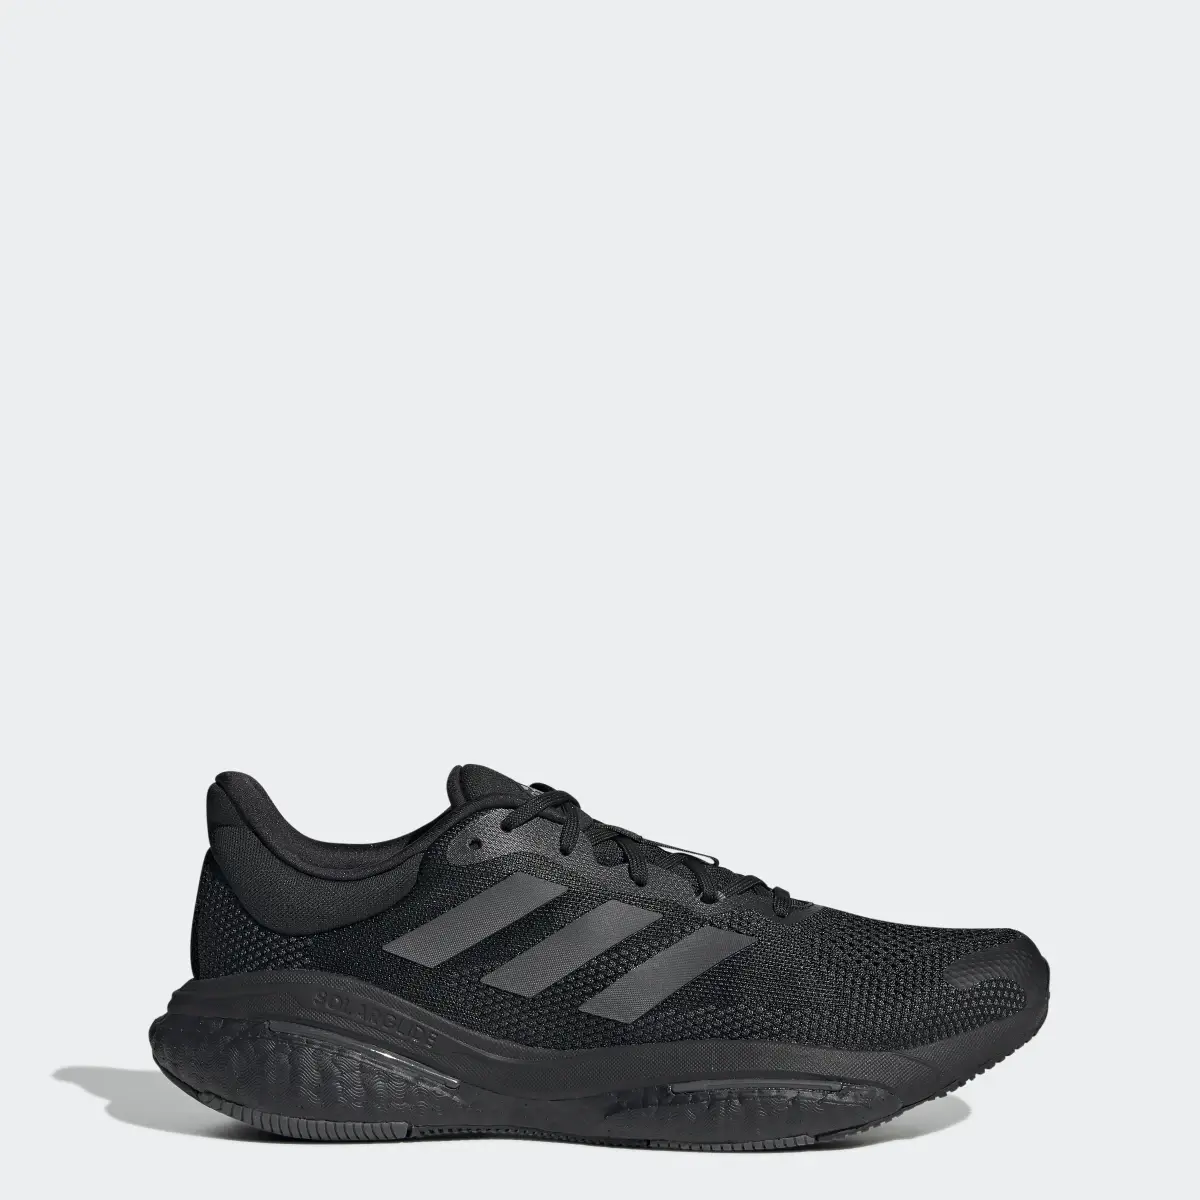 Adidas Solarglide 5 Shoes. 1